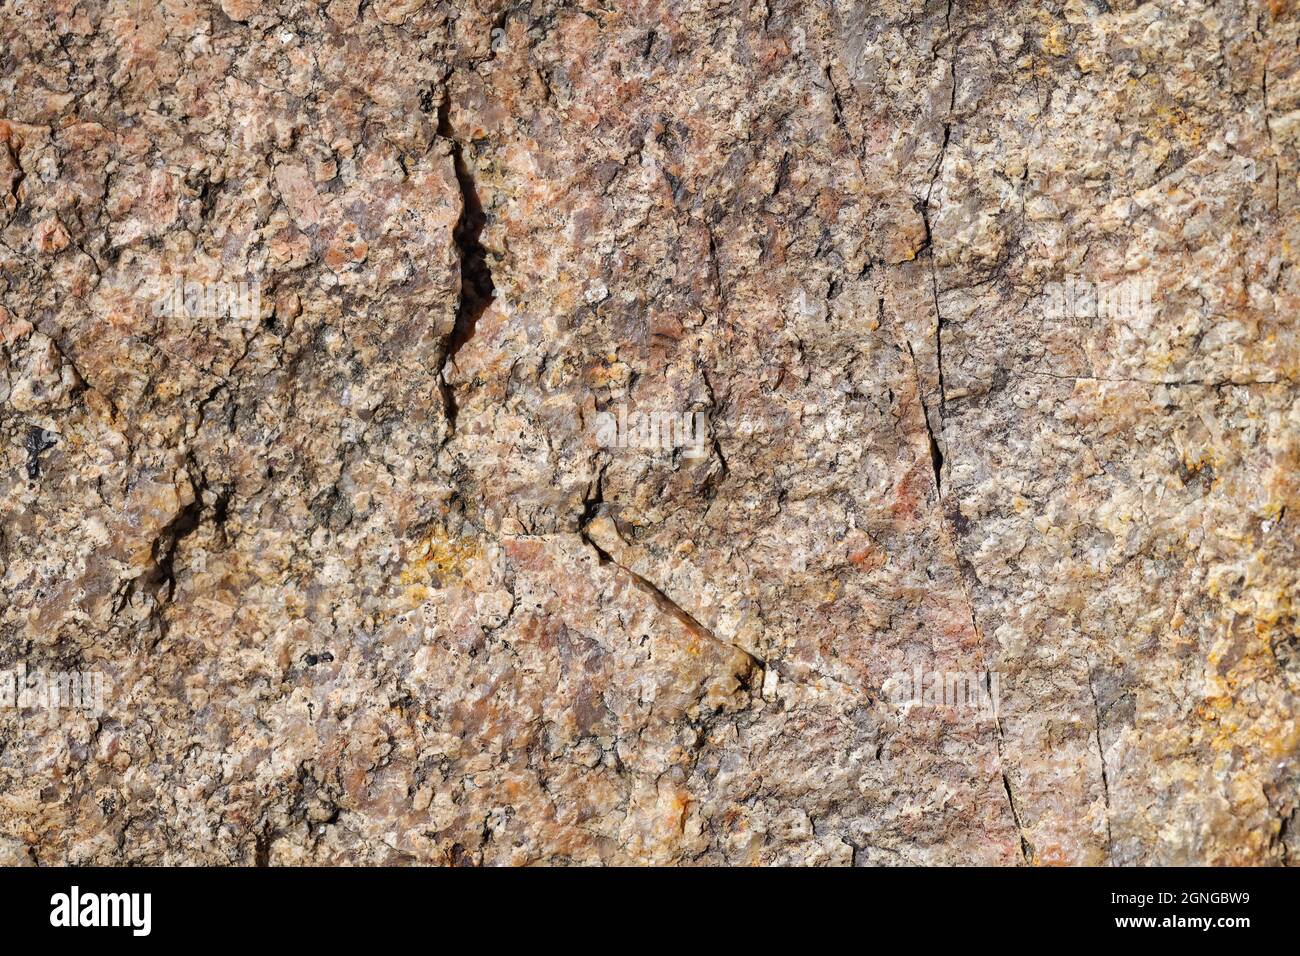 Granite stone surface texture. Texture of rough granit stone surface background. Abstract background from natural material Stock Photo